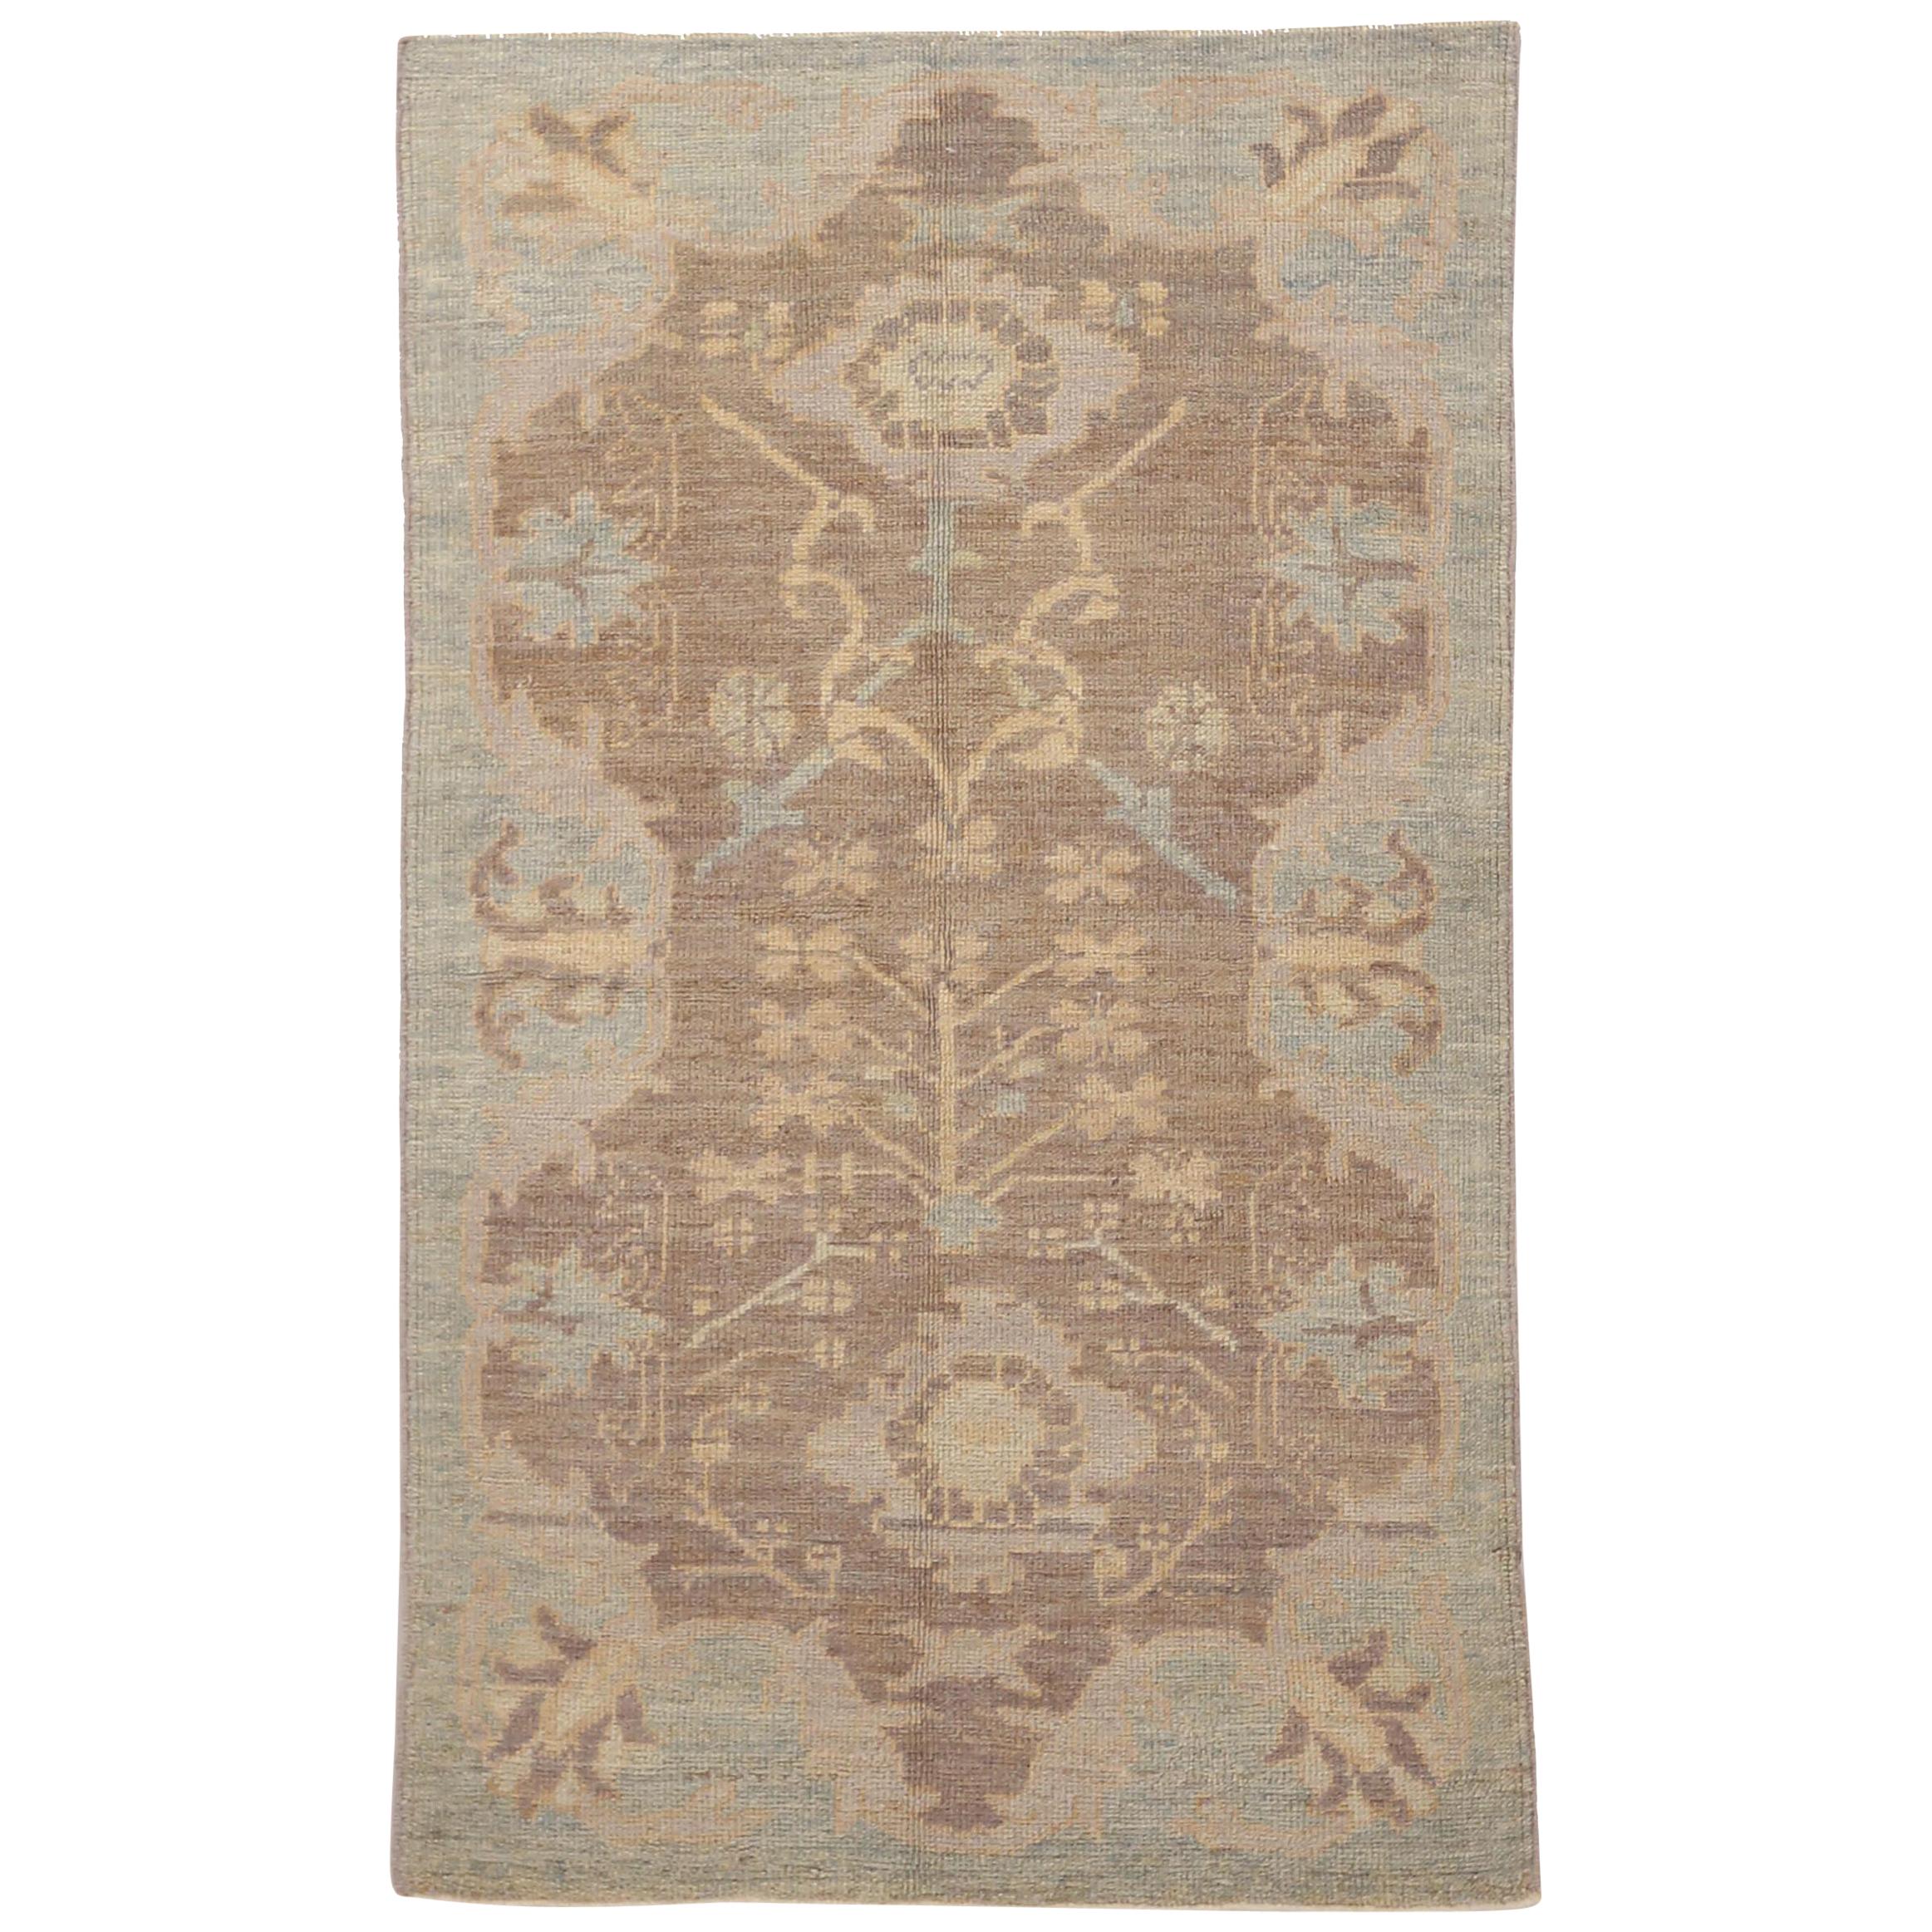 New Persian Oushak Rug with Brown and Blue Floral Design Patterns For Sale